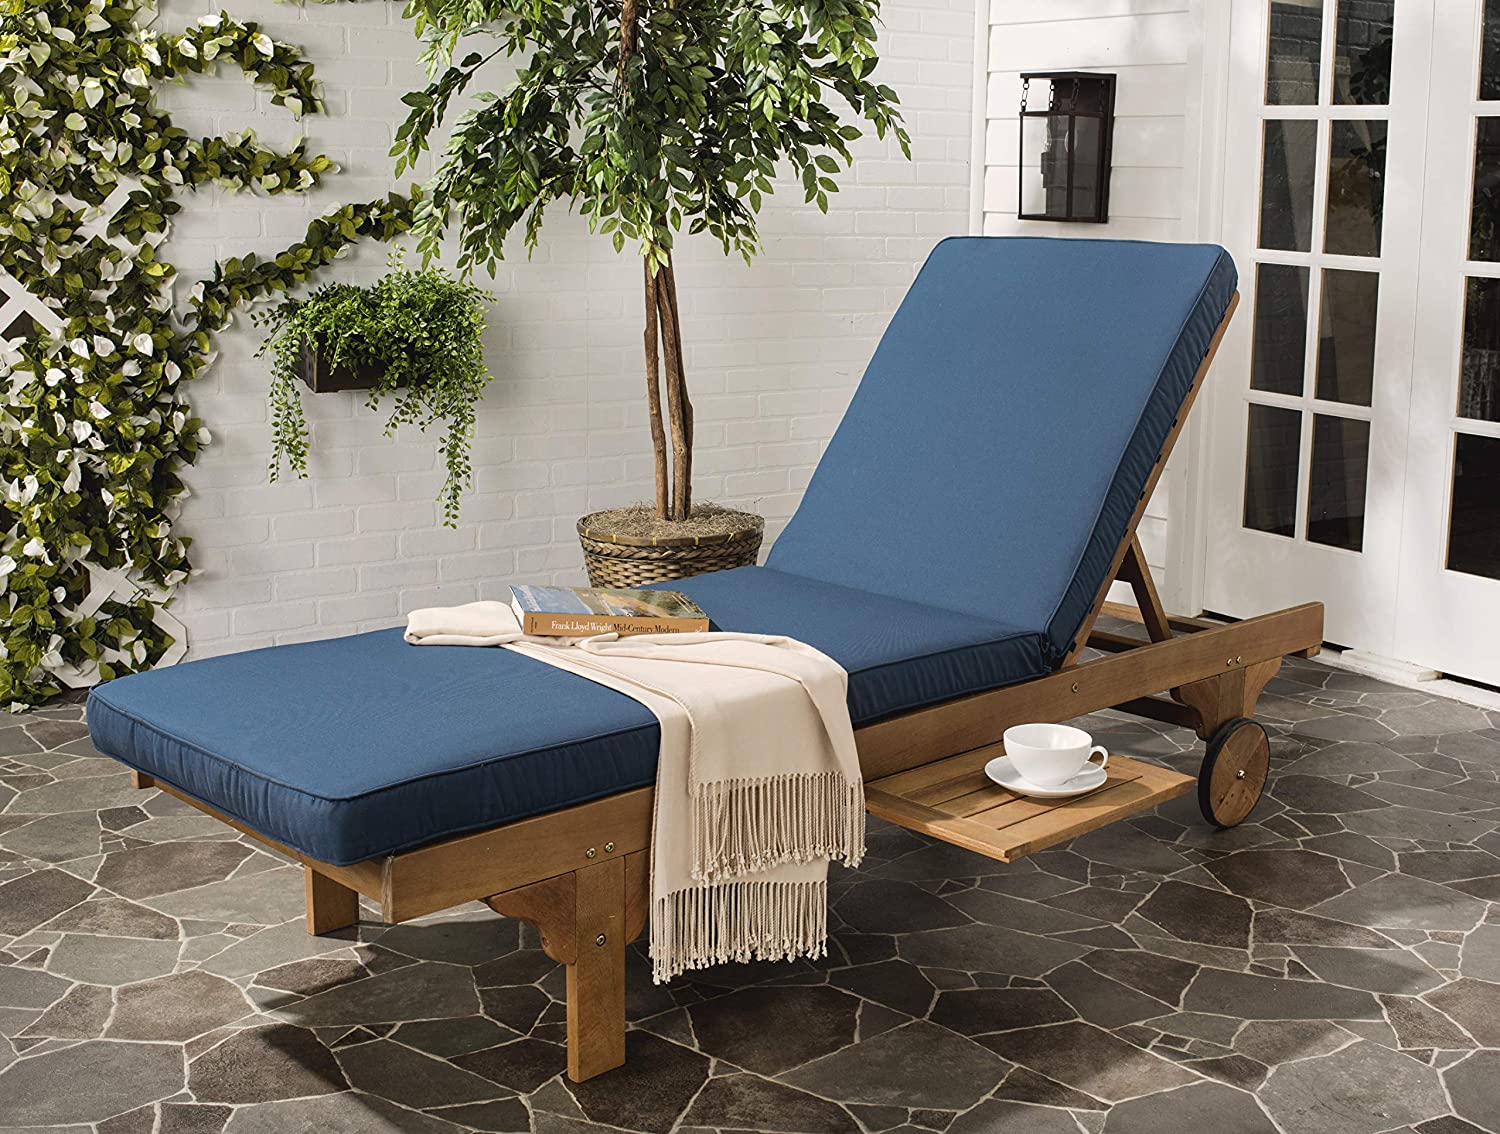 Safavieh Newport Chaise Lounge Chair, Natural/Navy